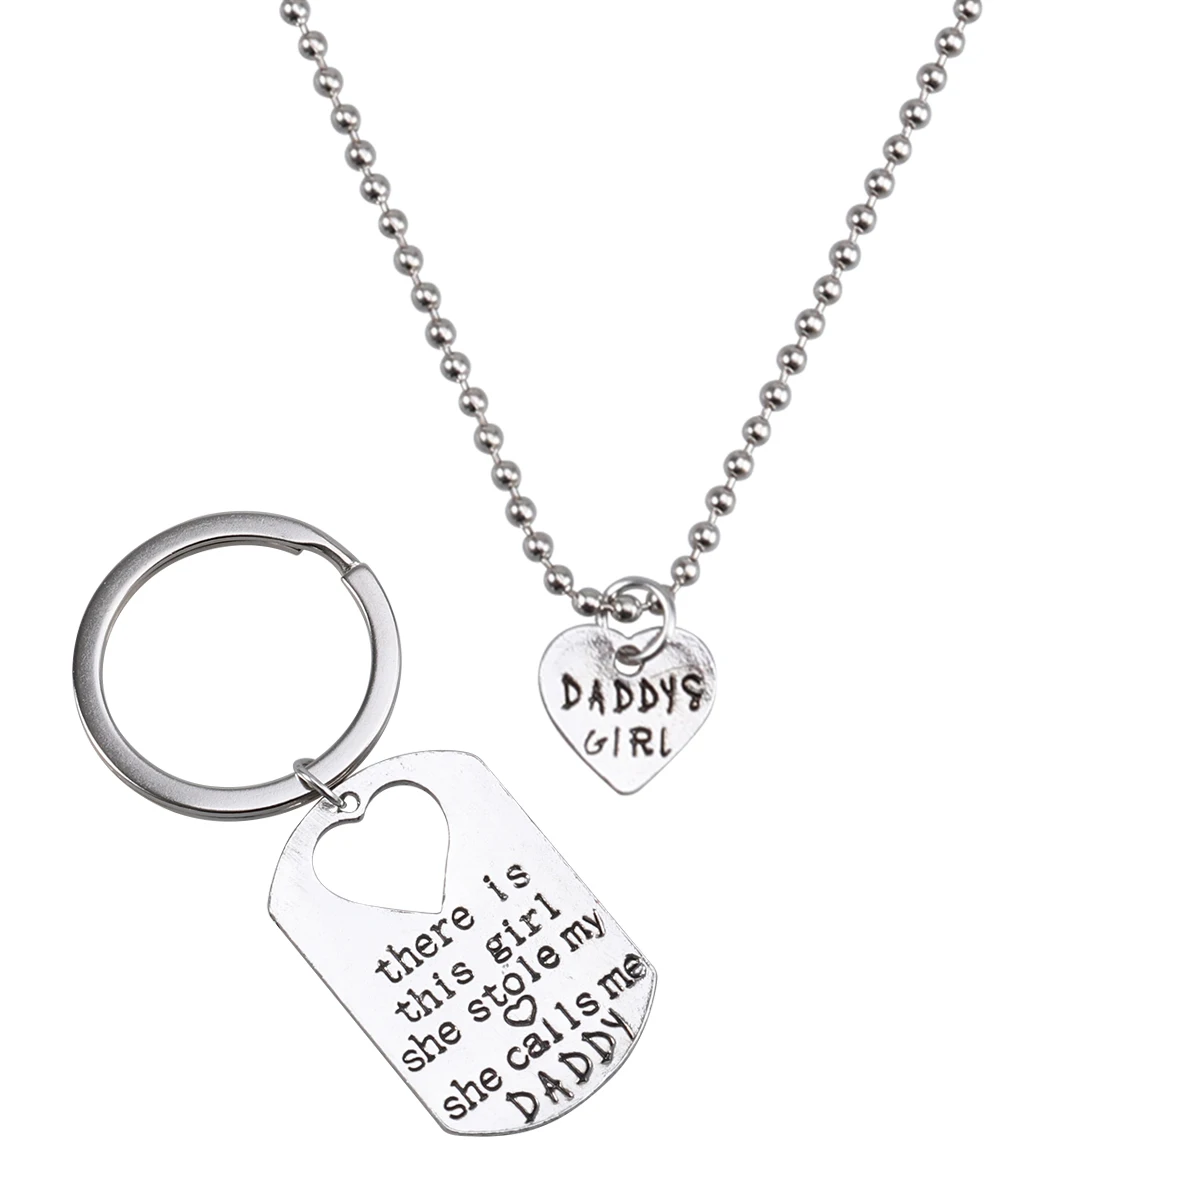 

Father Daughter Keychain & Daddys Girl Necklace Set "There's This Girl Who Stole My Heart She Calls Me Daddy" Daddy Gifts